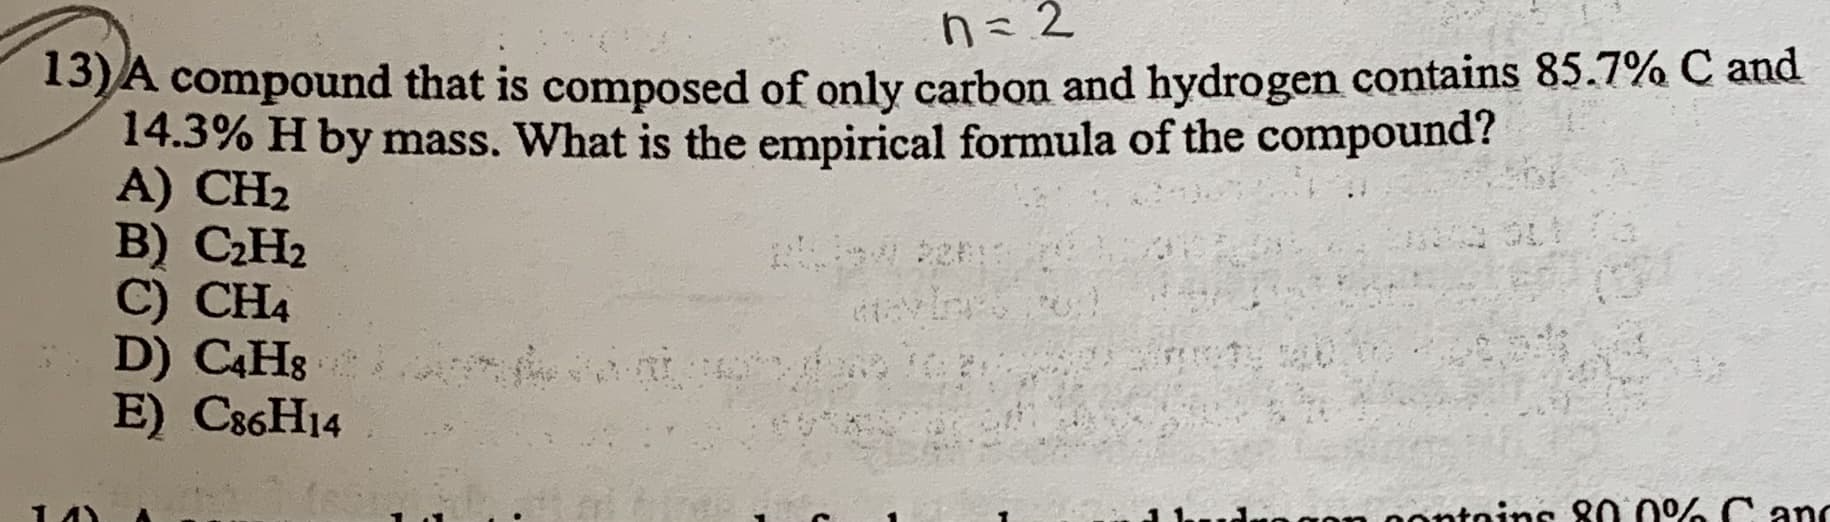 SA compound that is composed of only carbon and hydrogen contains 85.7% C and
14.3% H by mass. What is the empirical formula of the compound?
A) CH2
B) CH2
C) CH4
D) C4H8
E) C86H14
